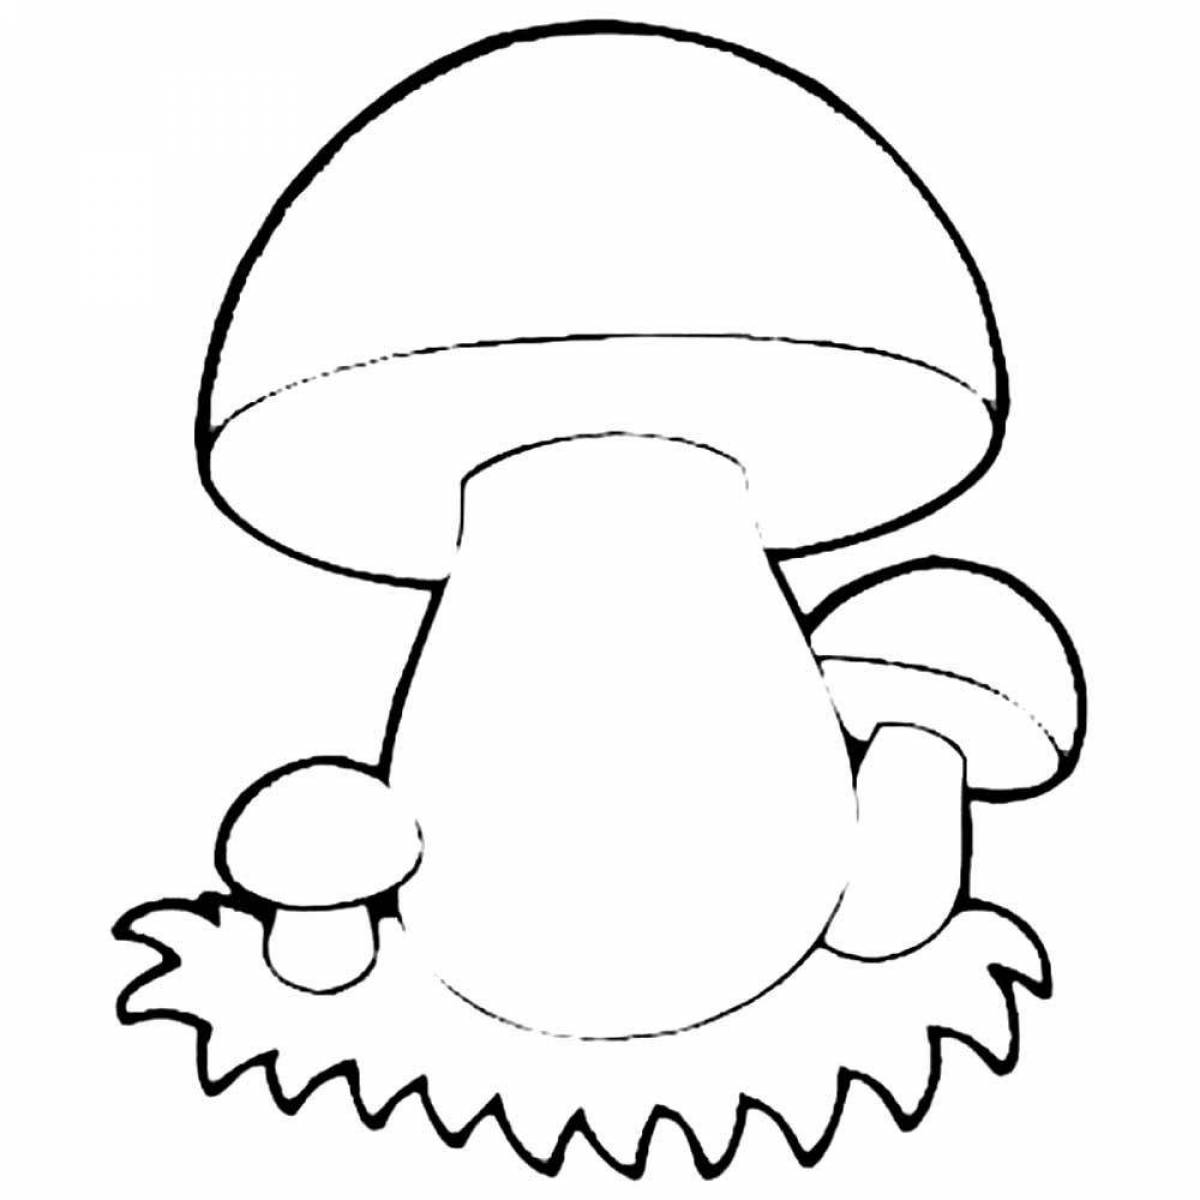 Exotic mushroom coloring page